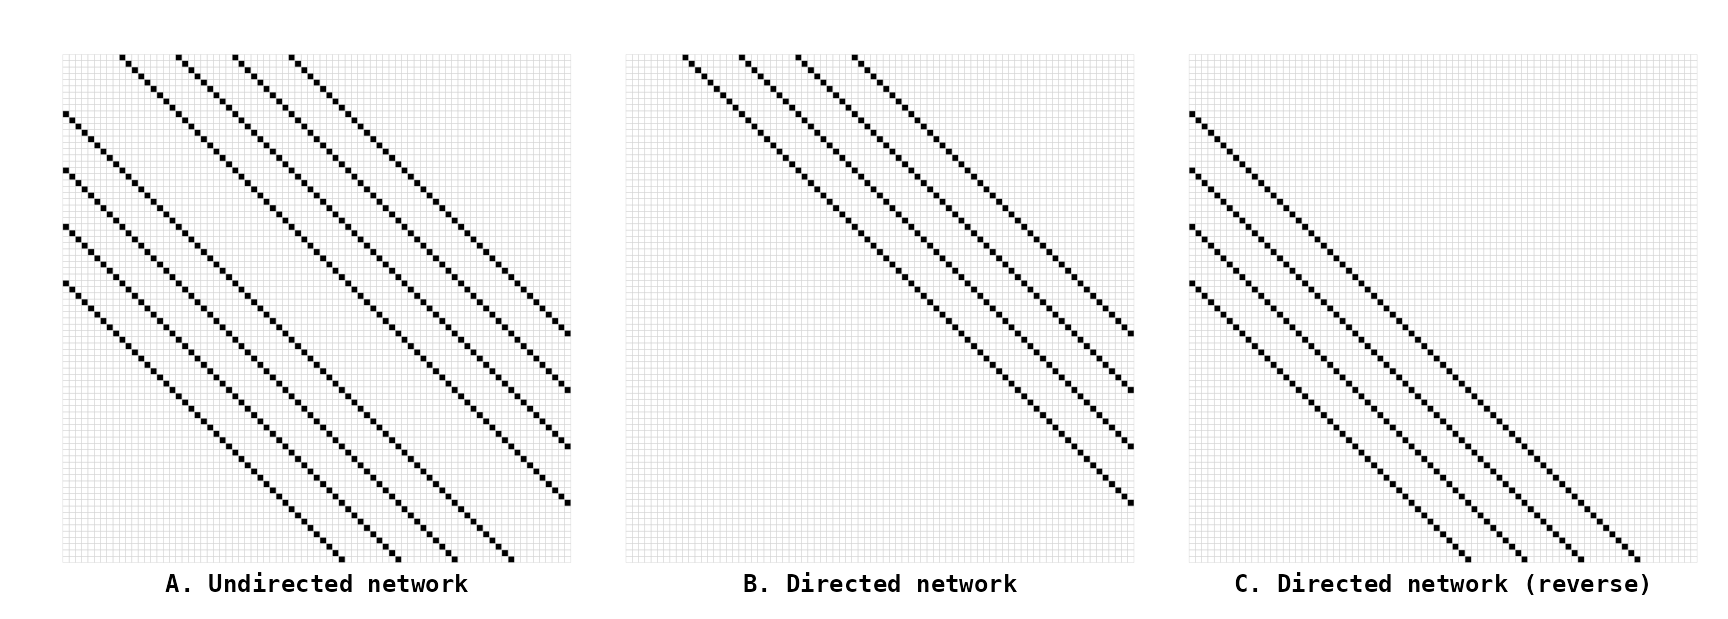 Figure 4. Connectivity matrices of the **Fool** (with degree = 4)